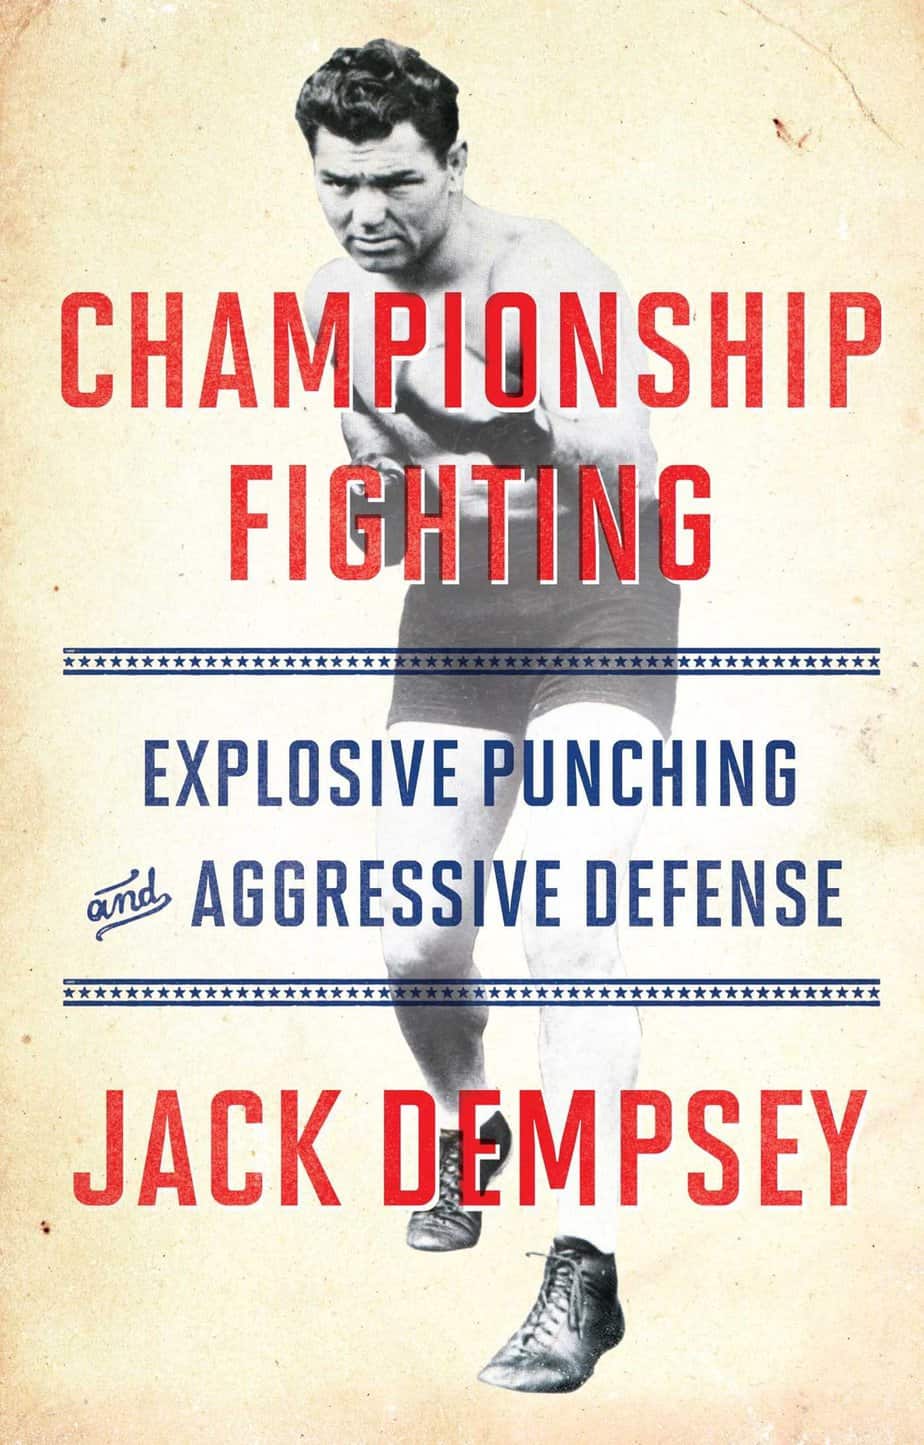 Book About Boxing